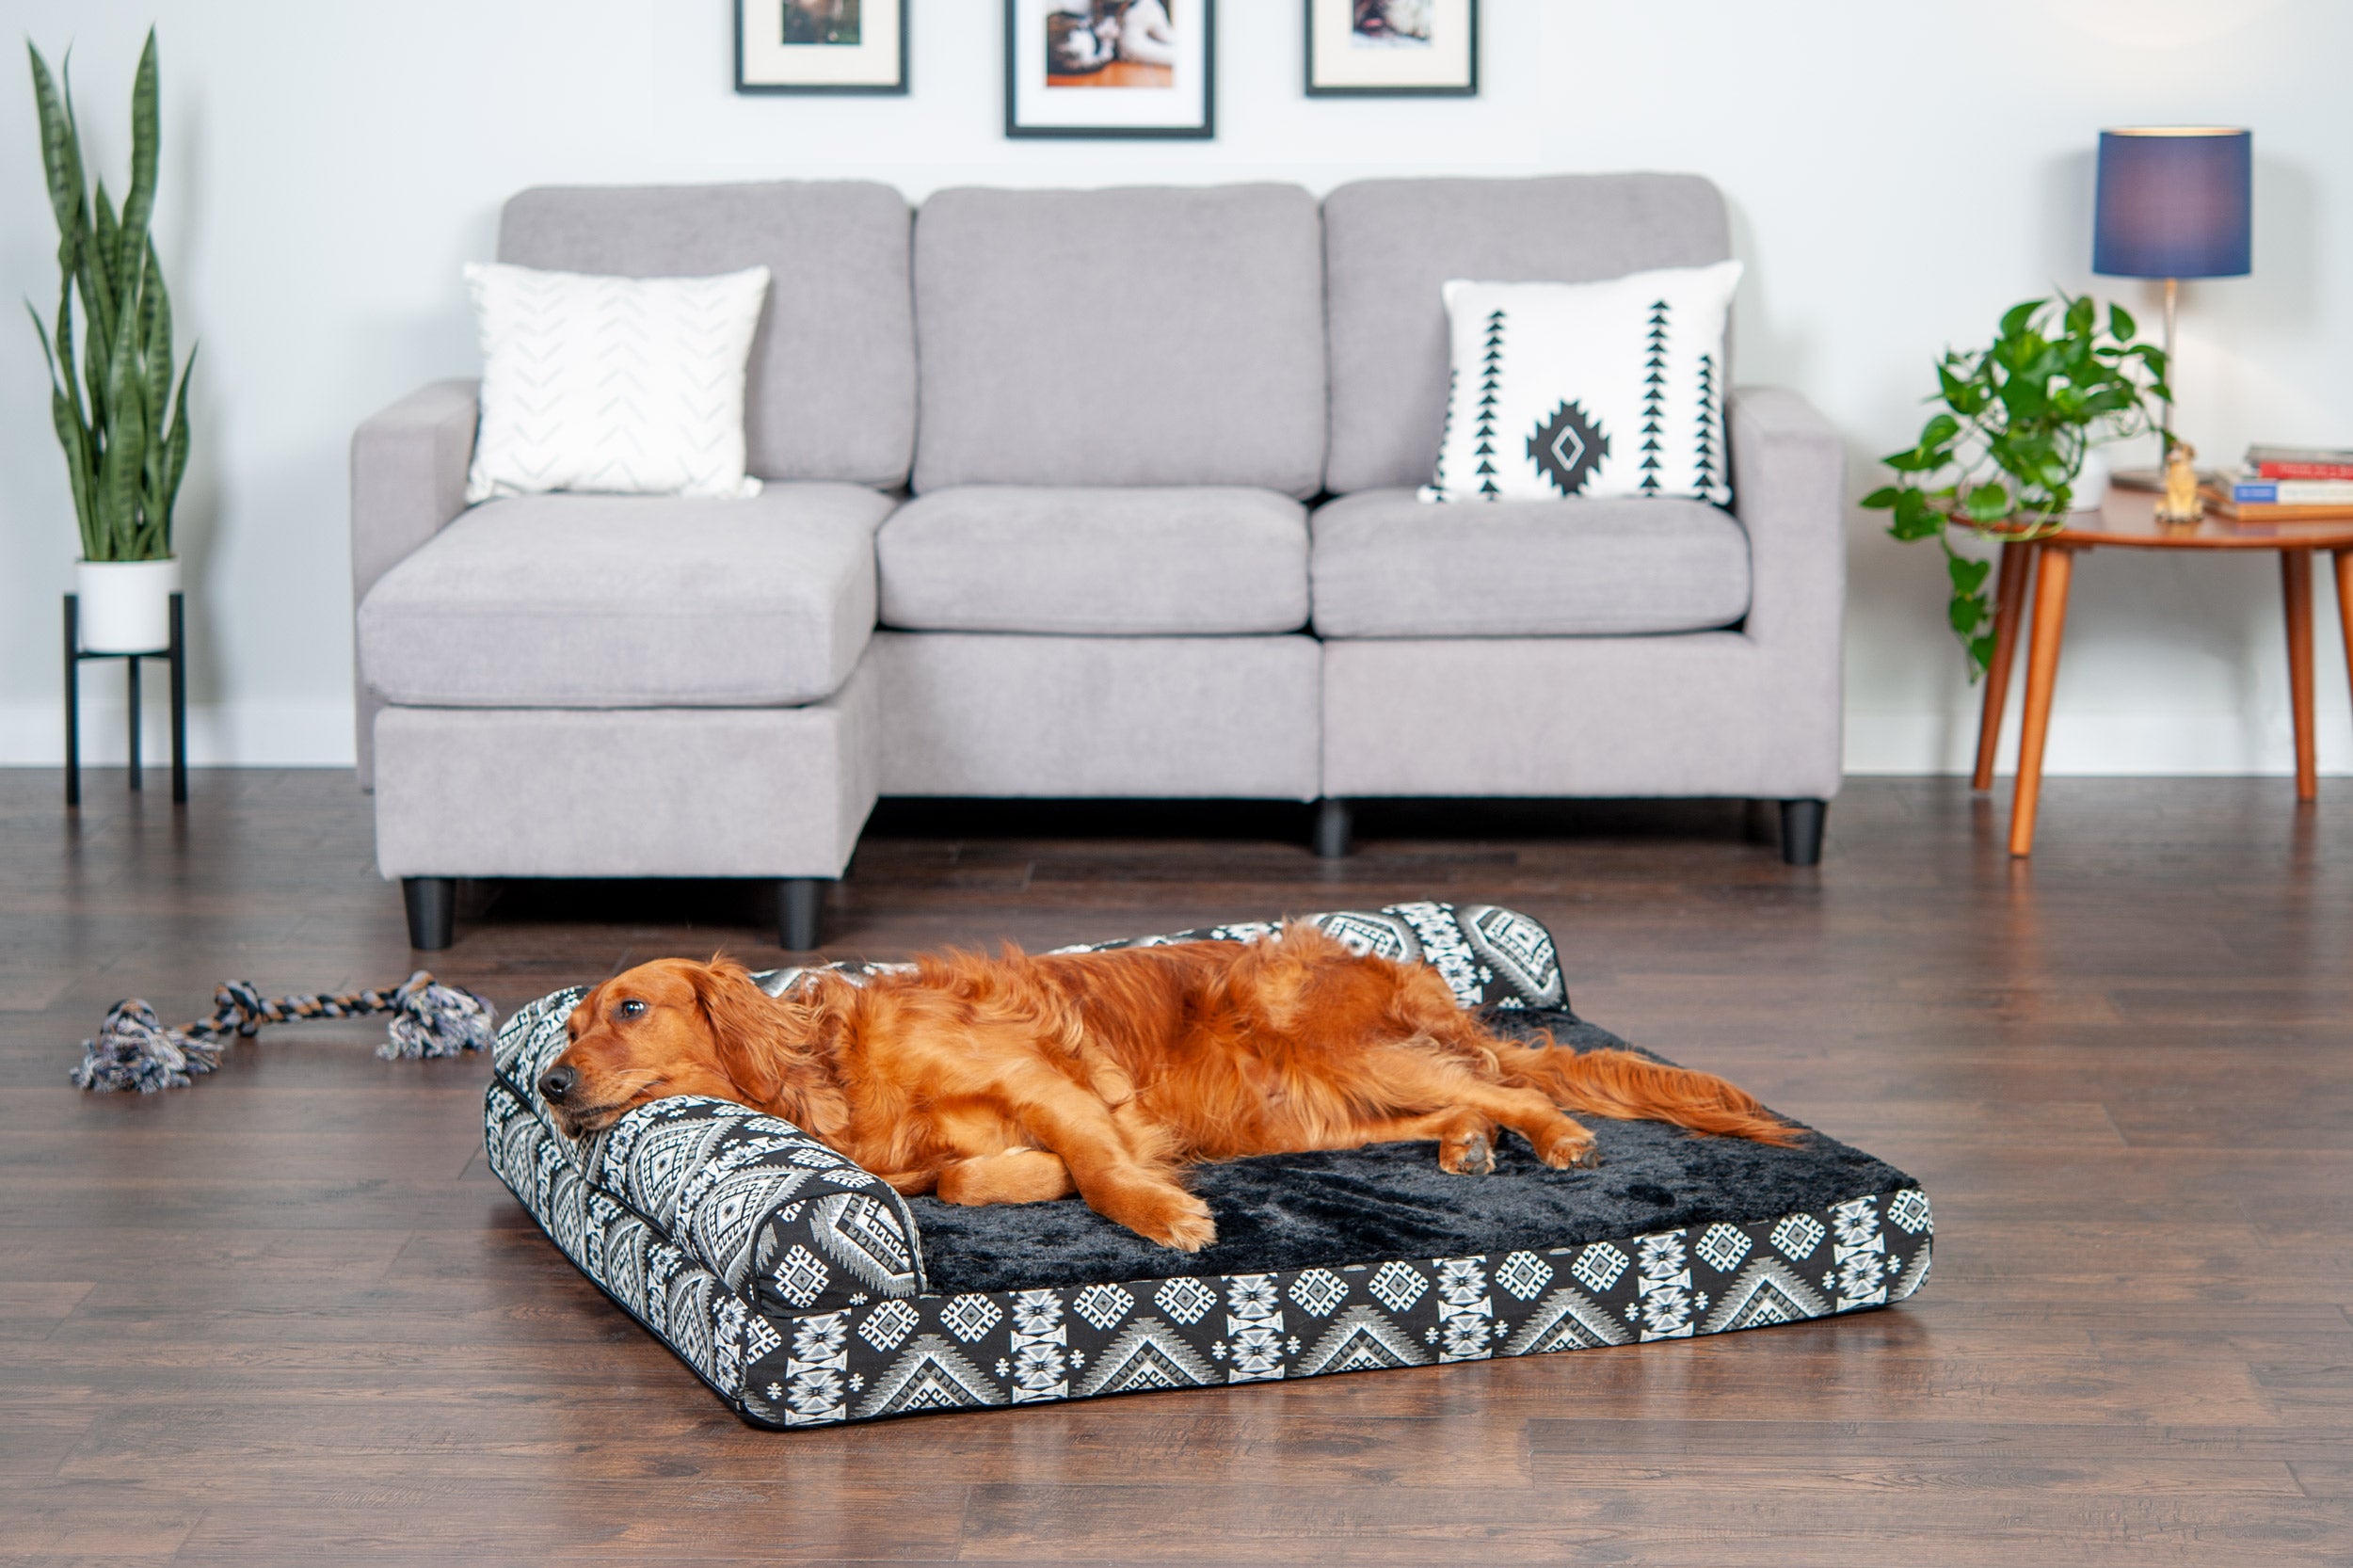 Deluxe Chaise Lounge Dog Bed - Southwest Kilim Furhaven Pet Products